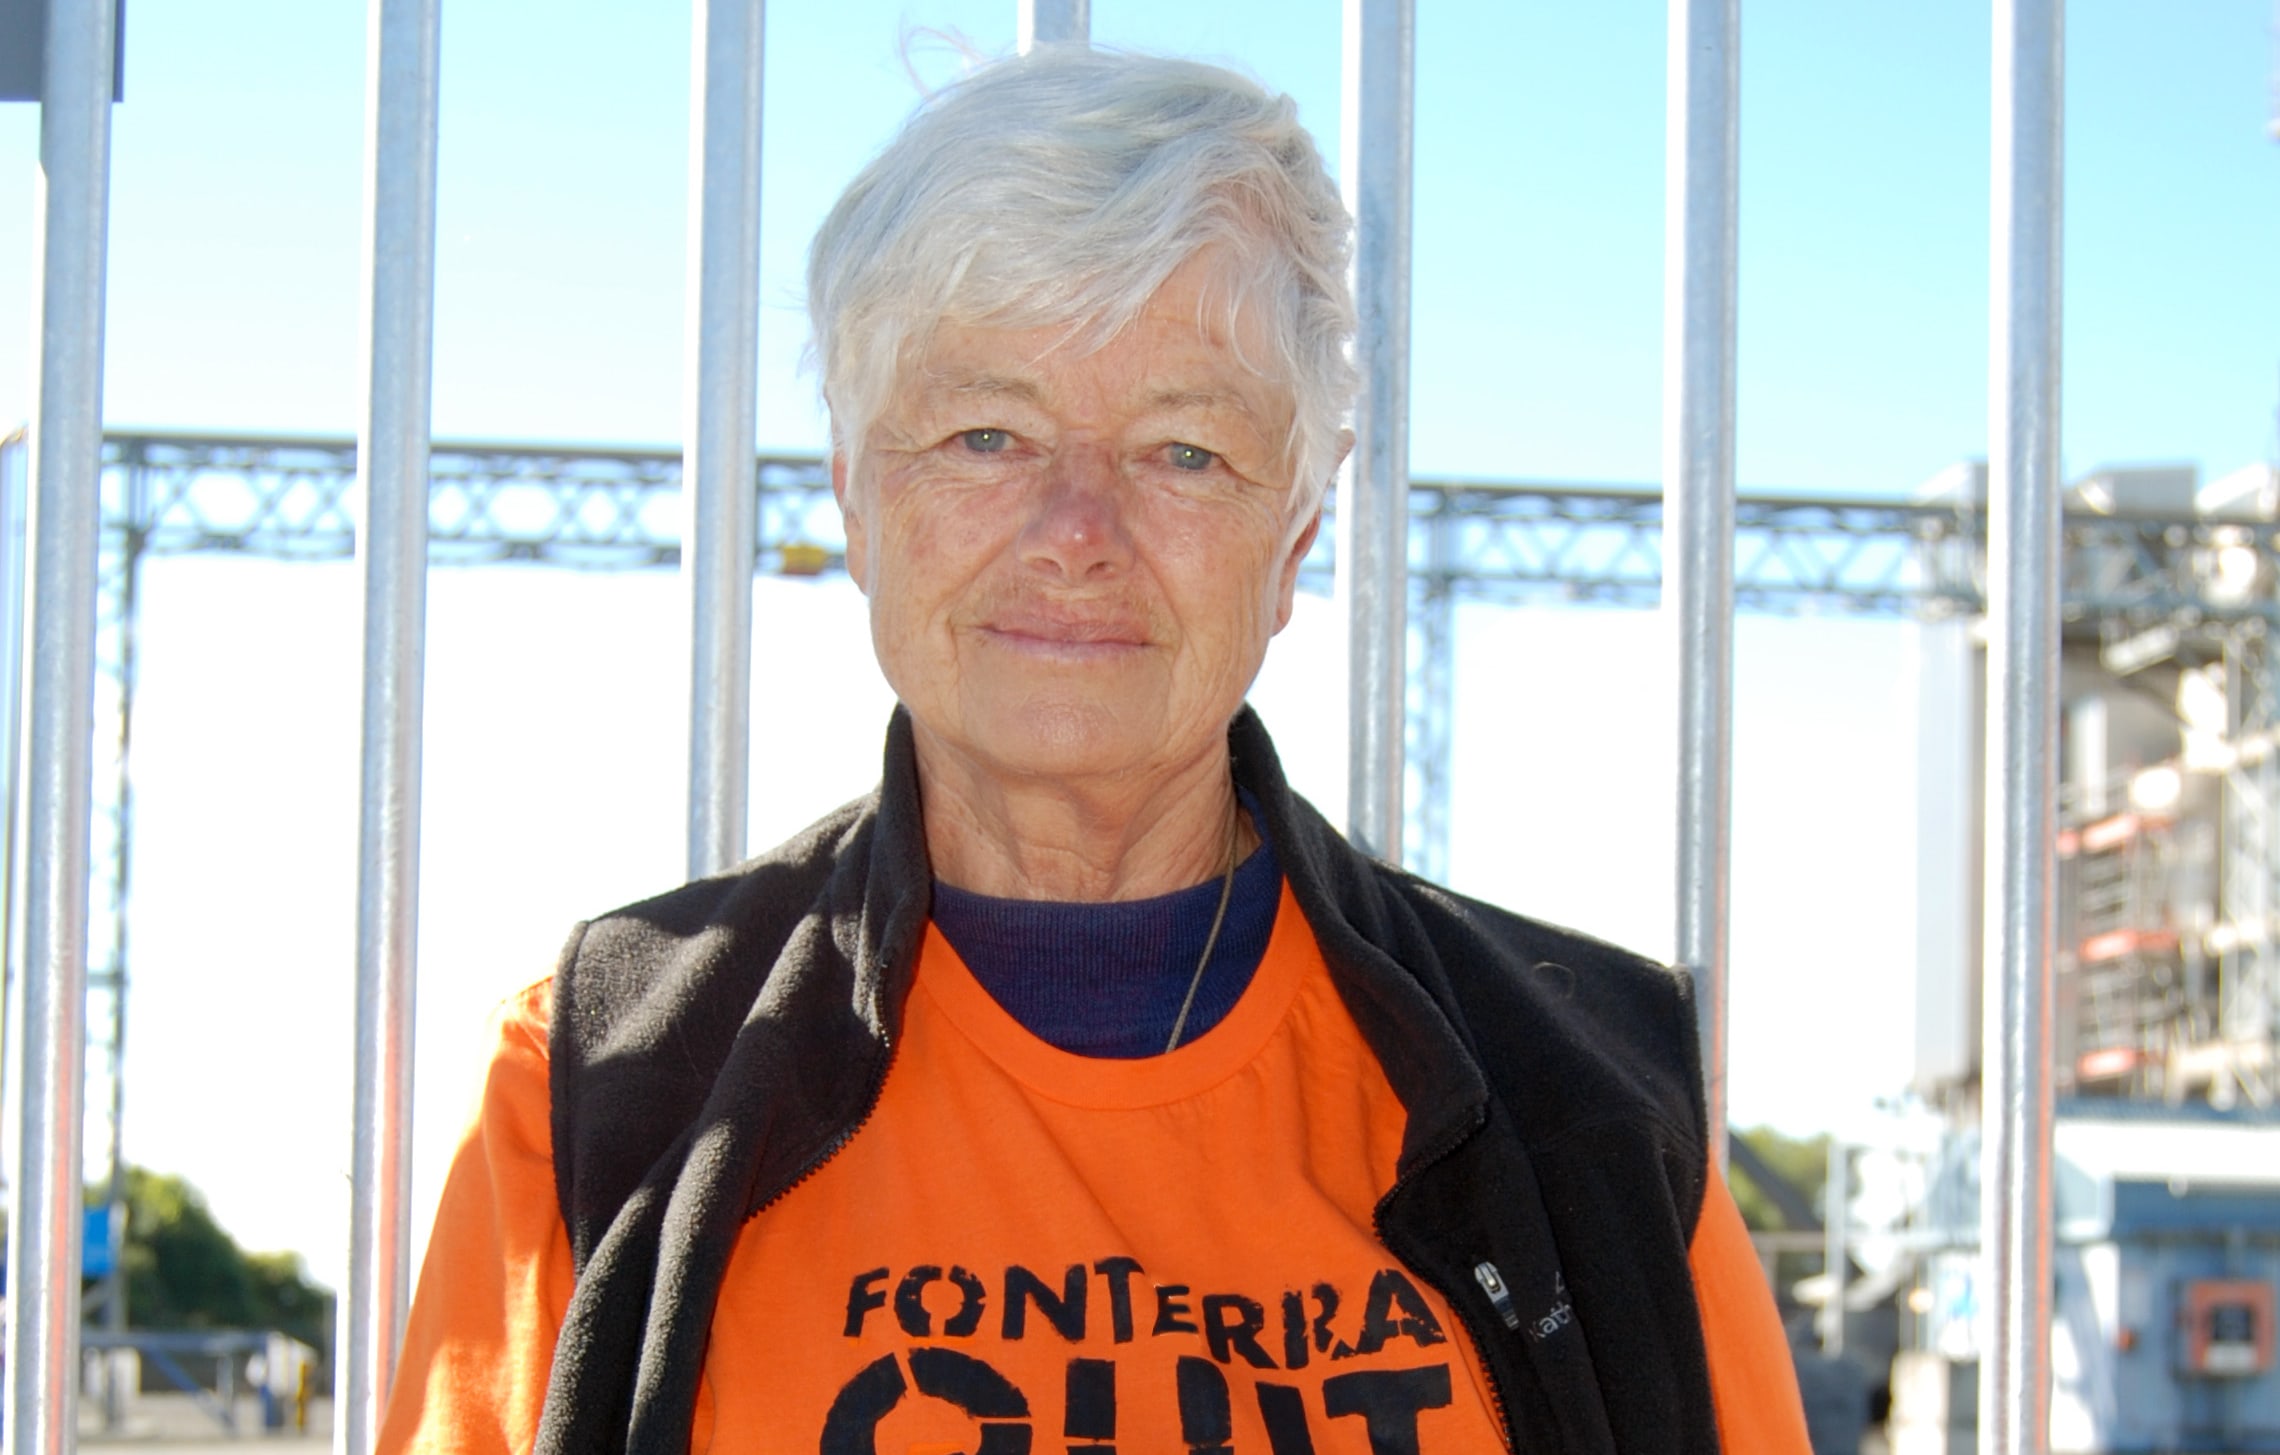 Former Green Party co-leader Jeanette Fitzsimons at the Fonterra protest.